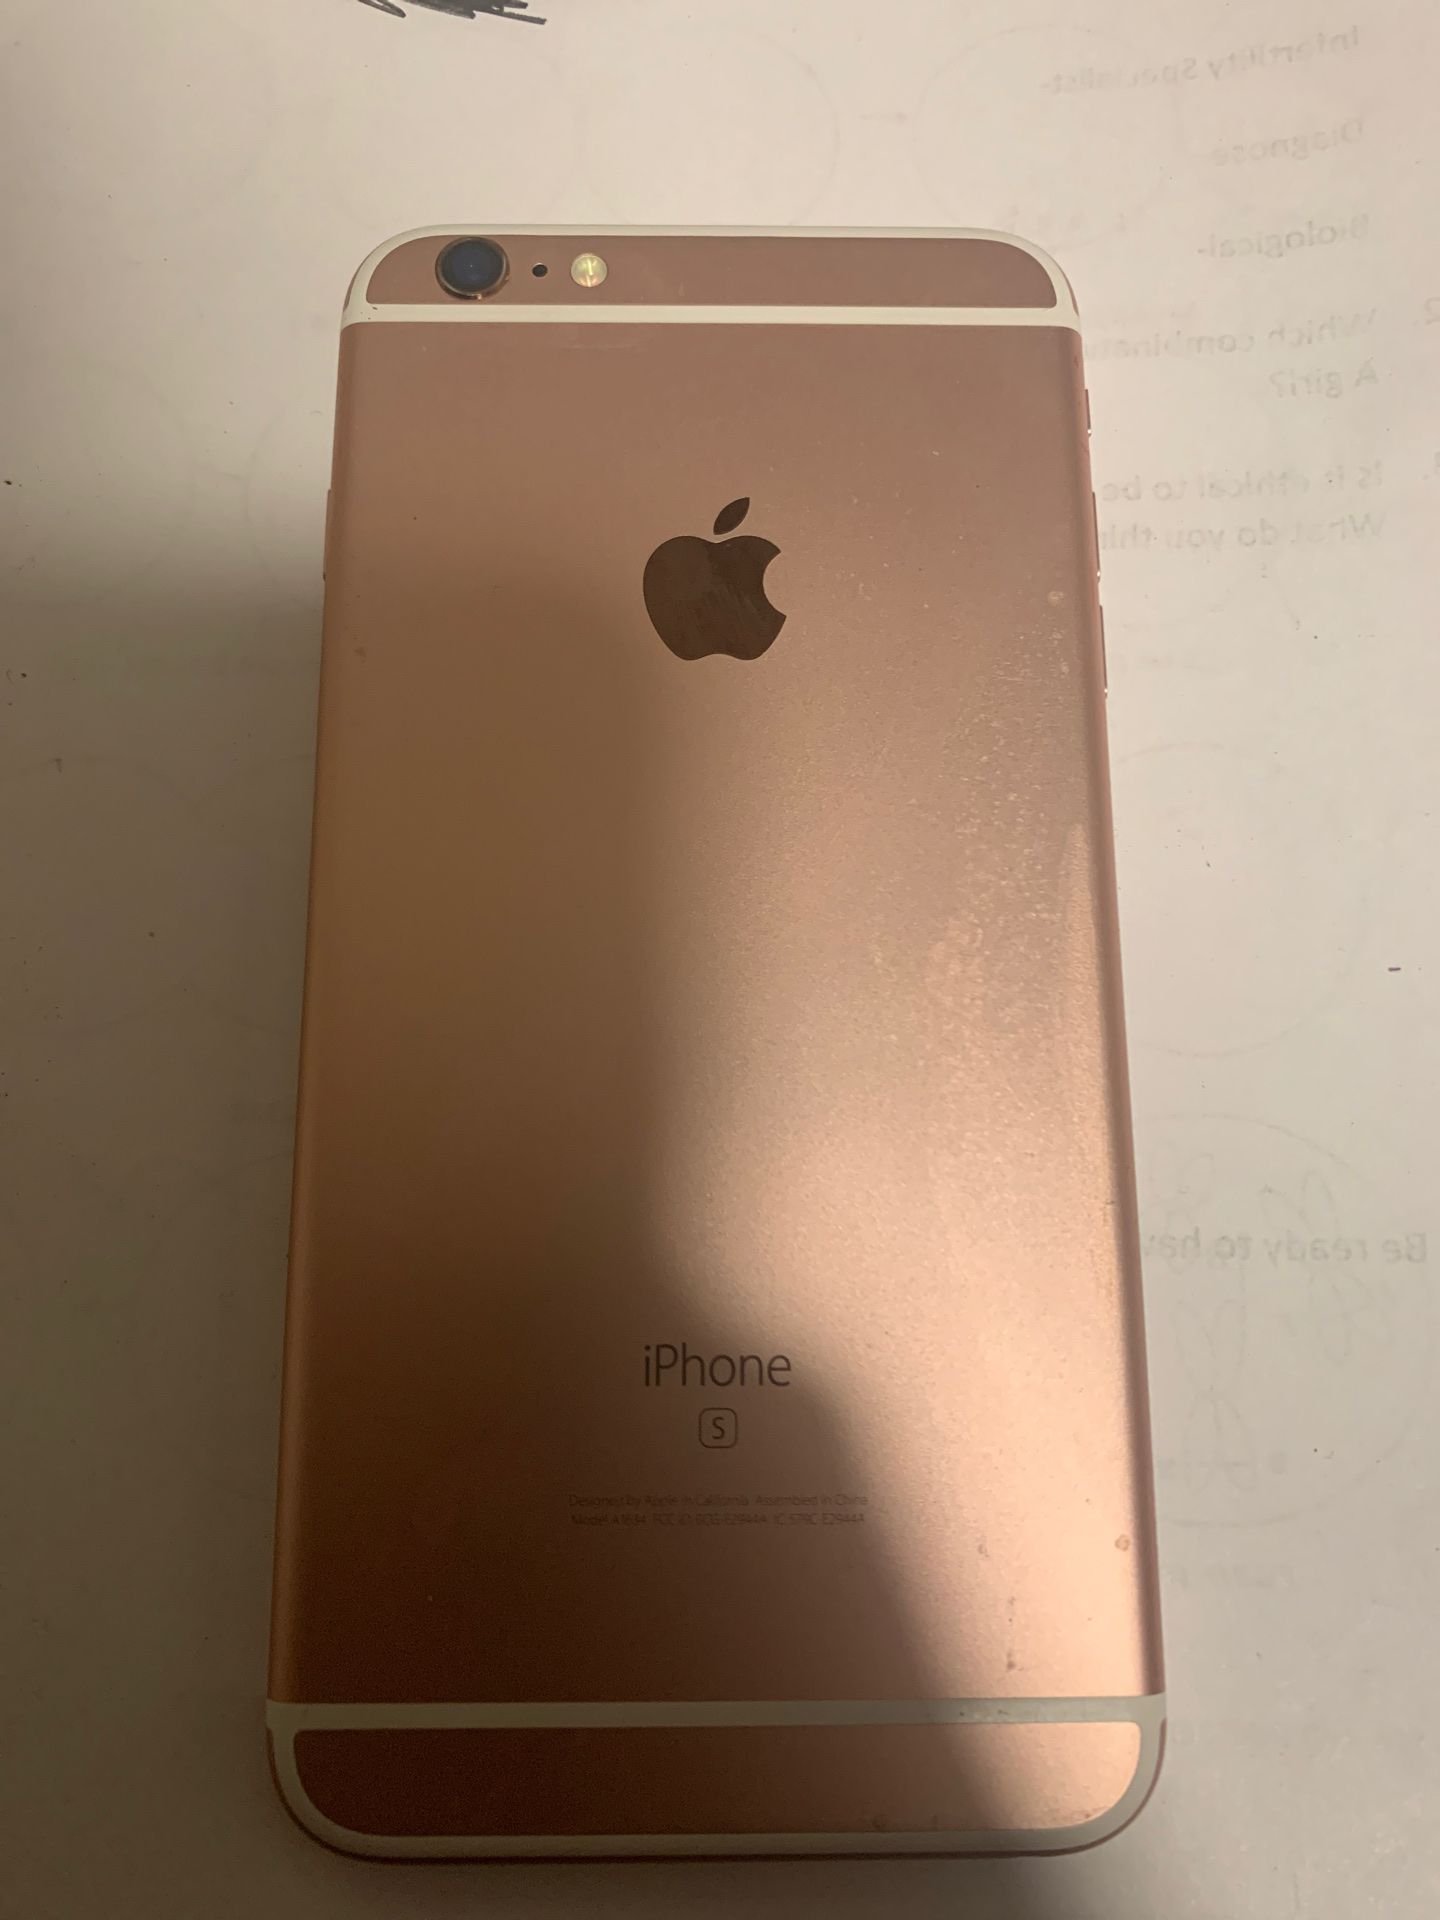 iPhone 6s rose gold